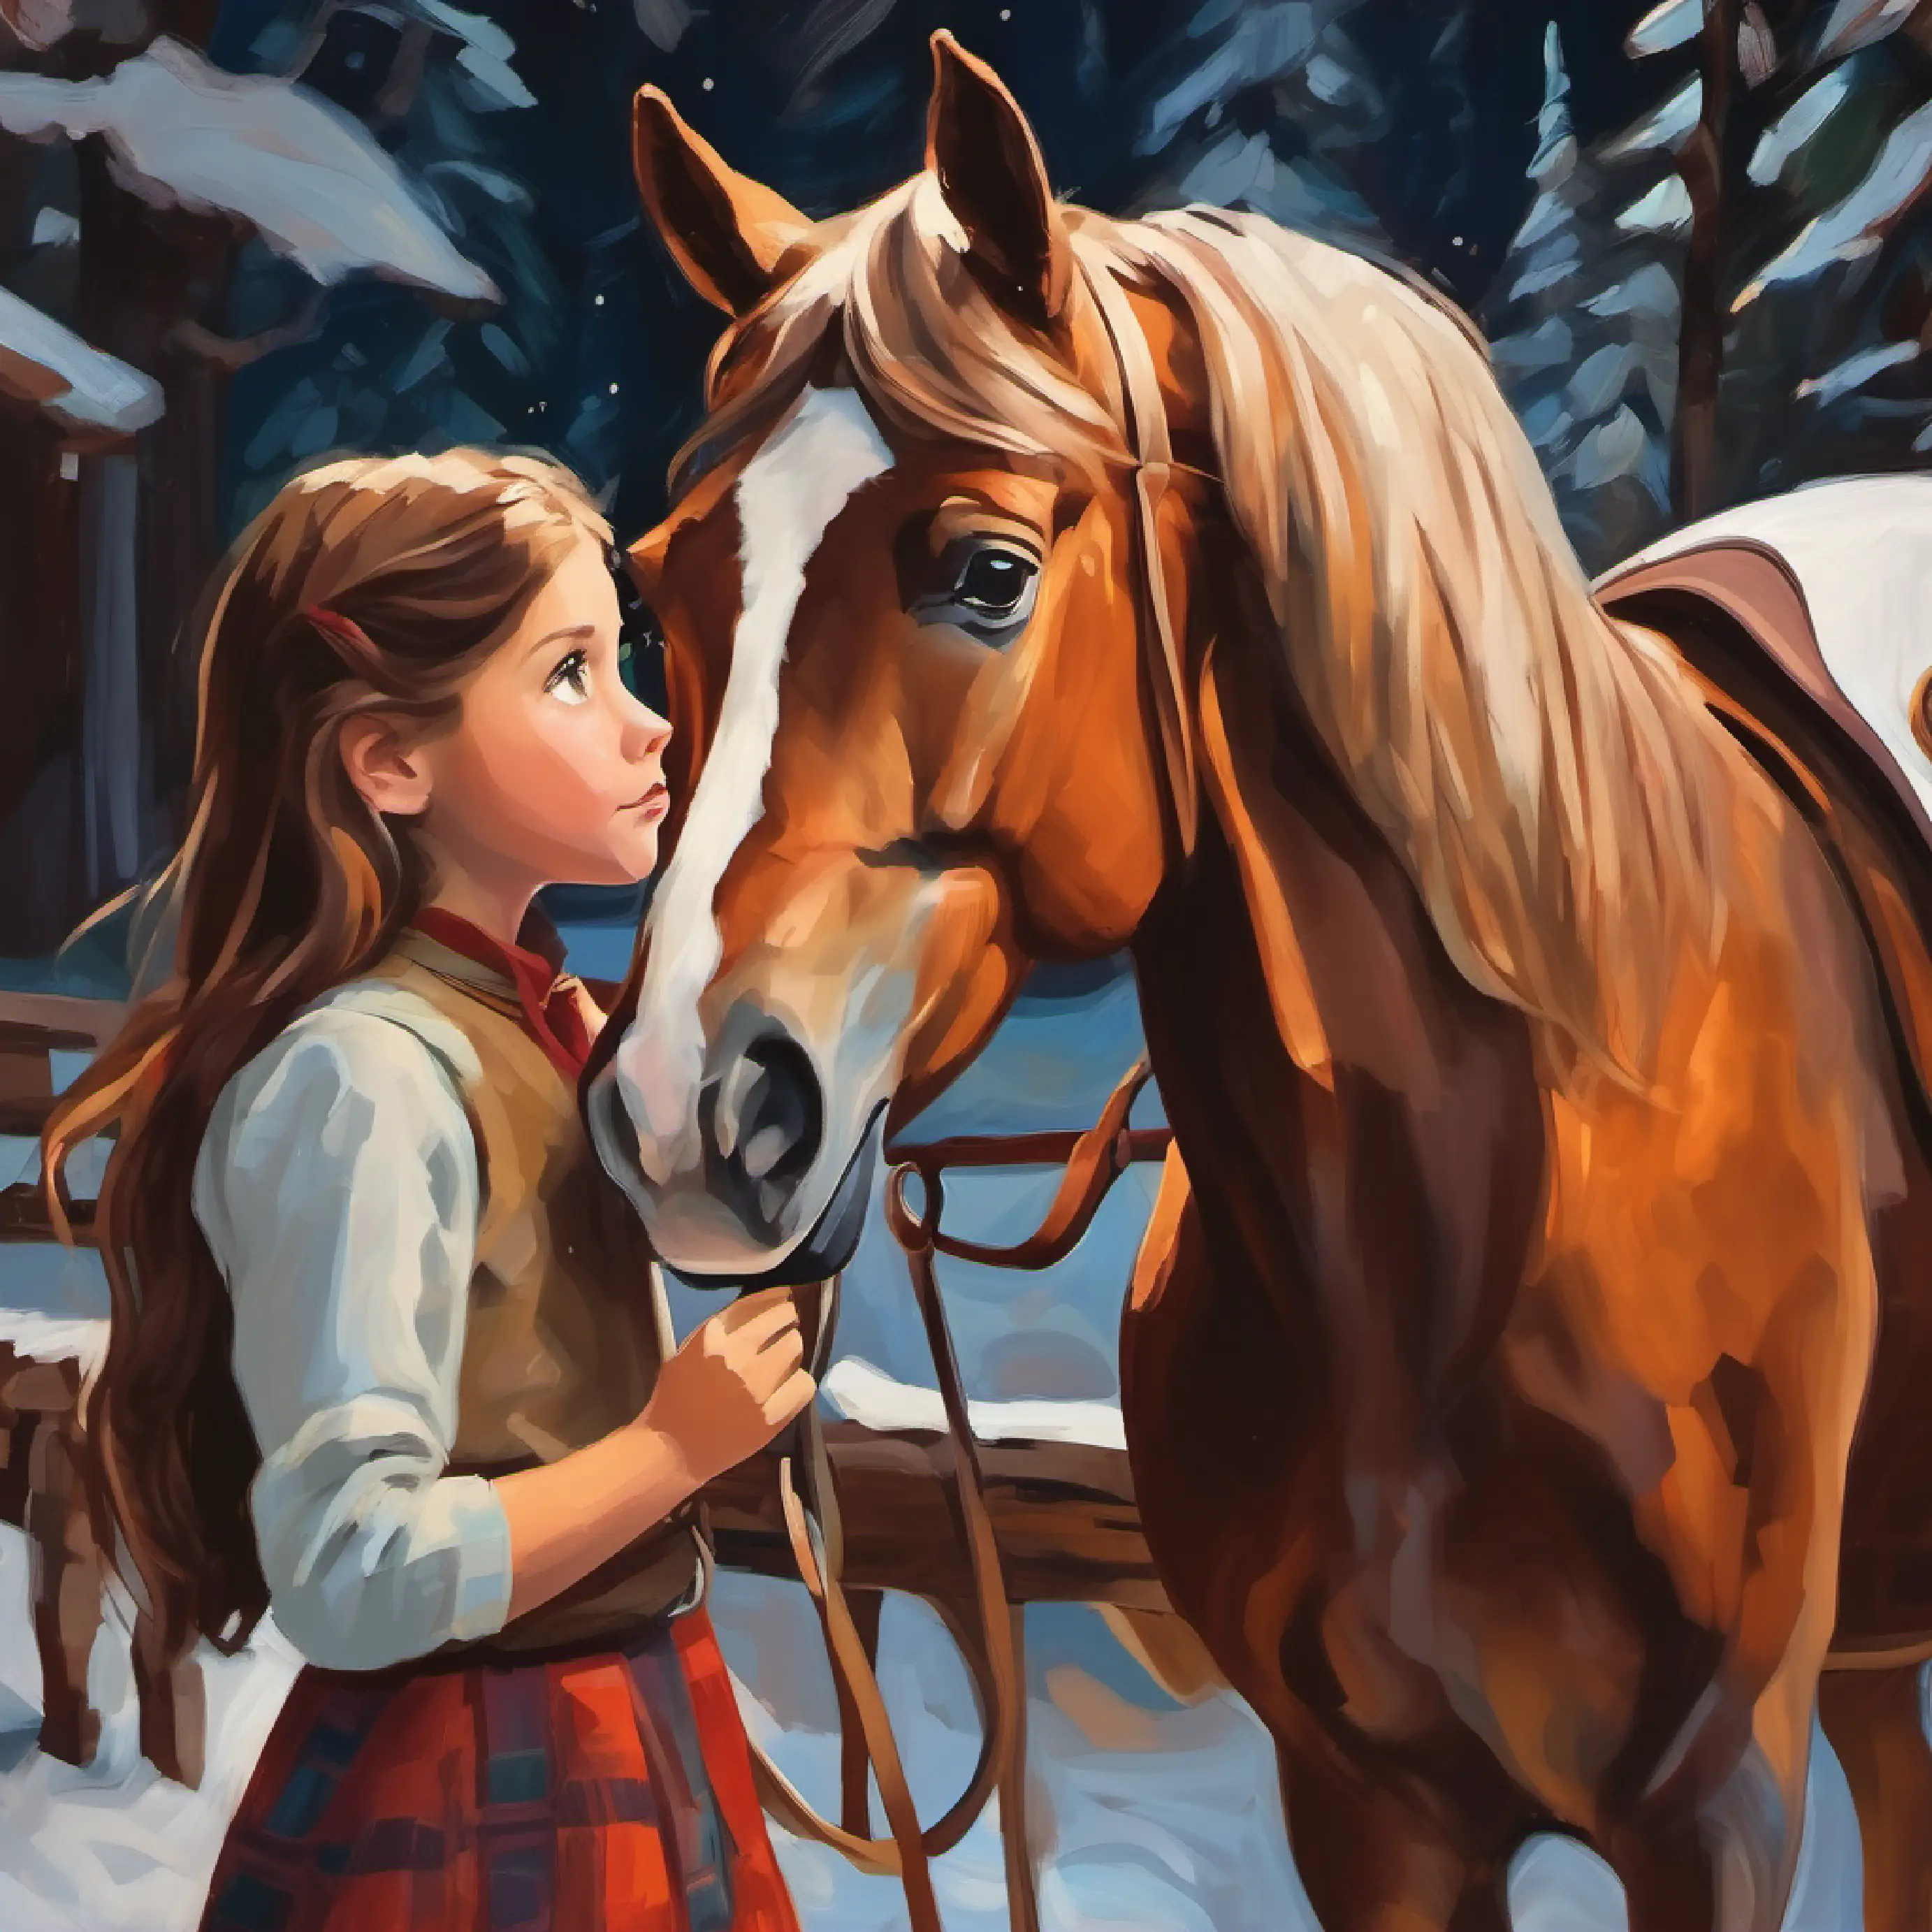 Brave young girl with hopeful eyes and long brown hair  finding and speaking to the horse